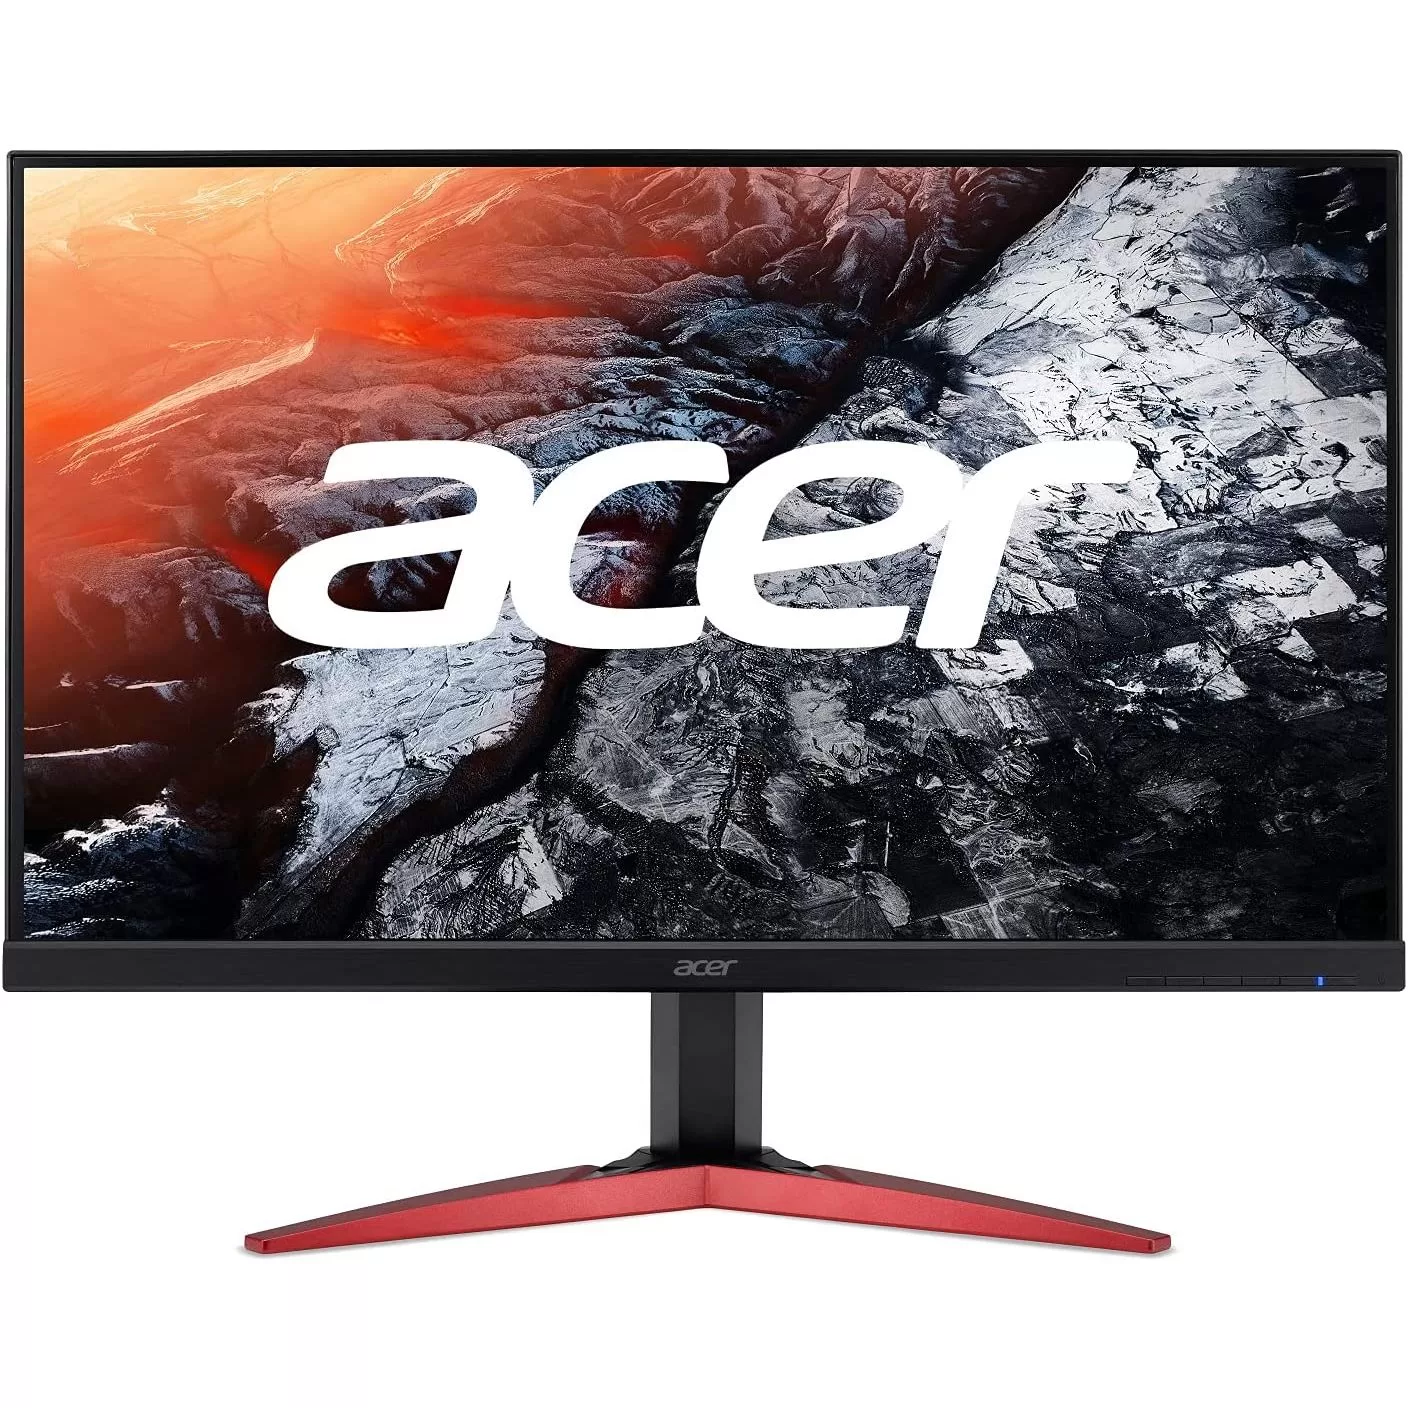 Acer LED Gaming Monitor, KG251Q, 25-inch, 165HZ and 1MS response time LCD 6